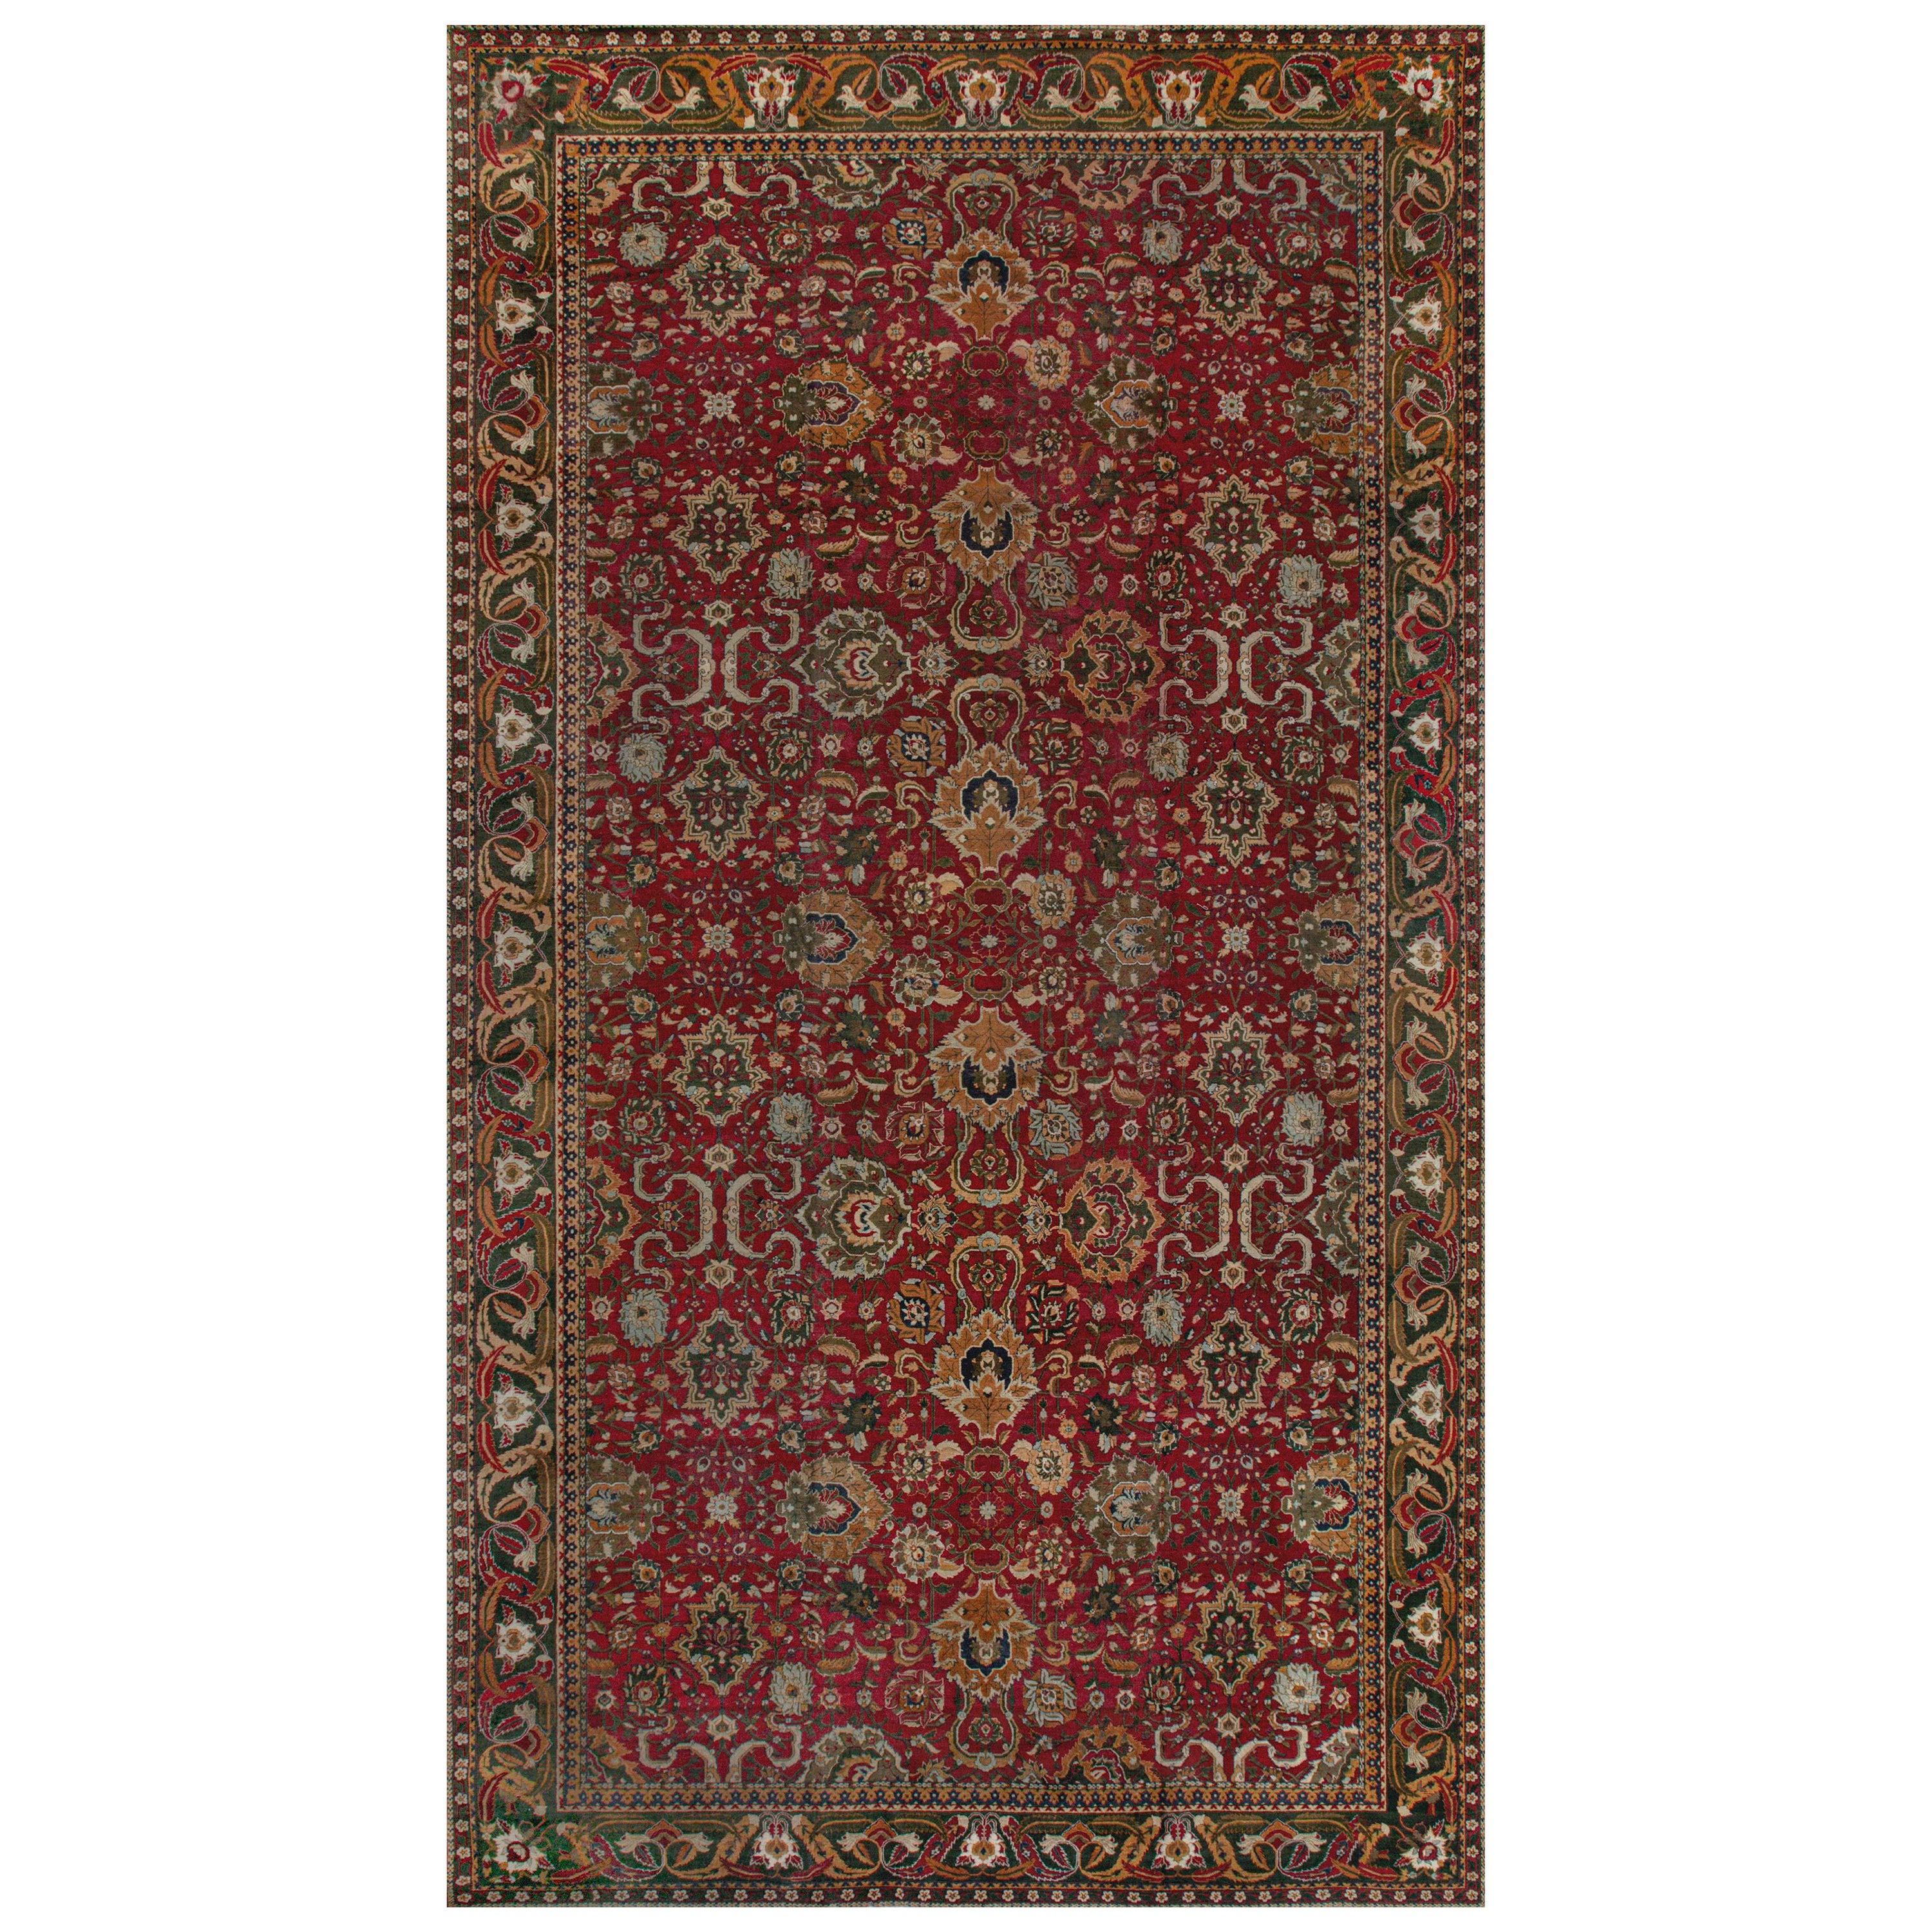 Authentic Indian Agra Bold Red Handmade Wool Carpet